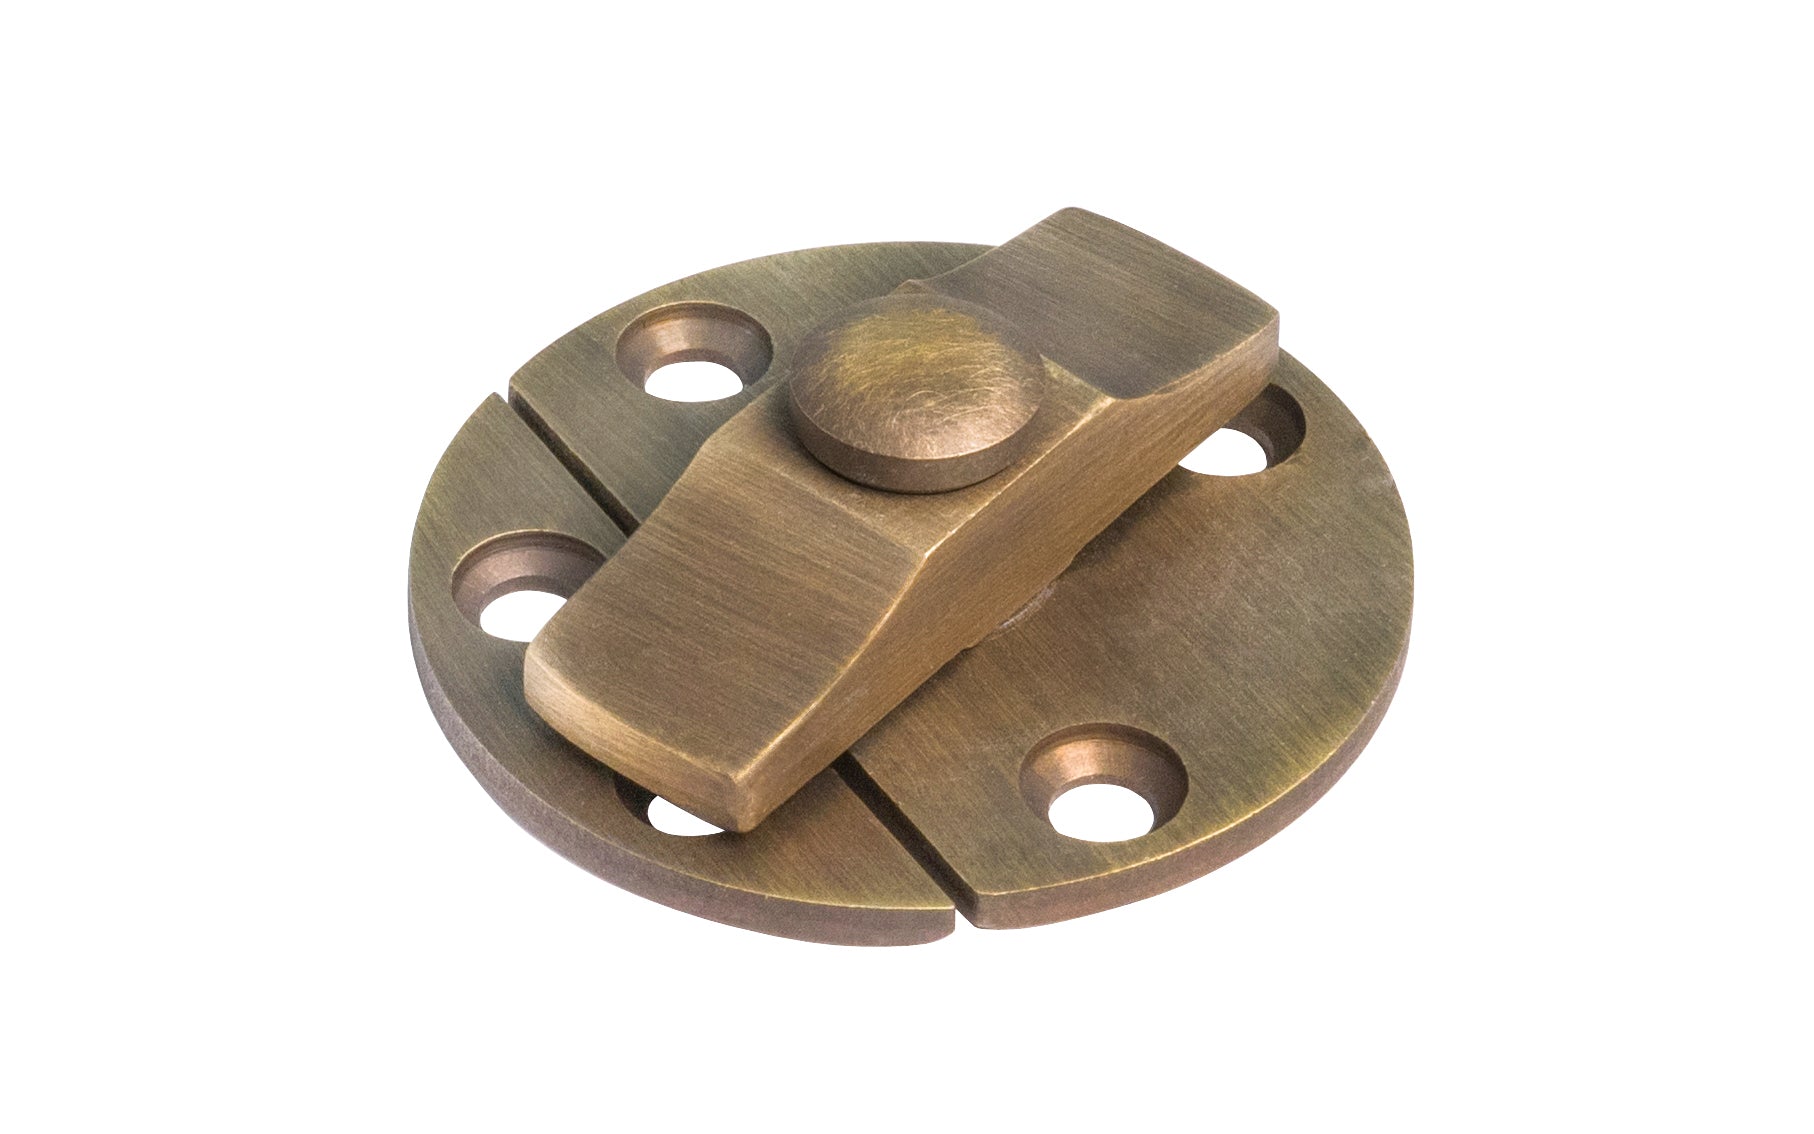 Solid Brass 1-1/2 Diameter Turn Button With Back Plates